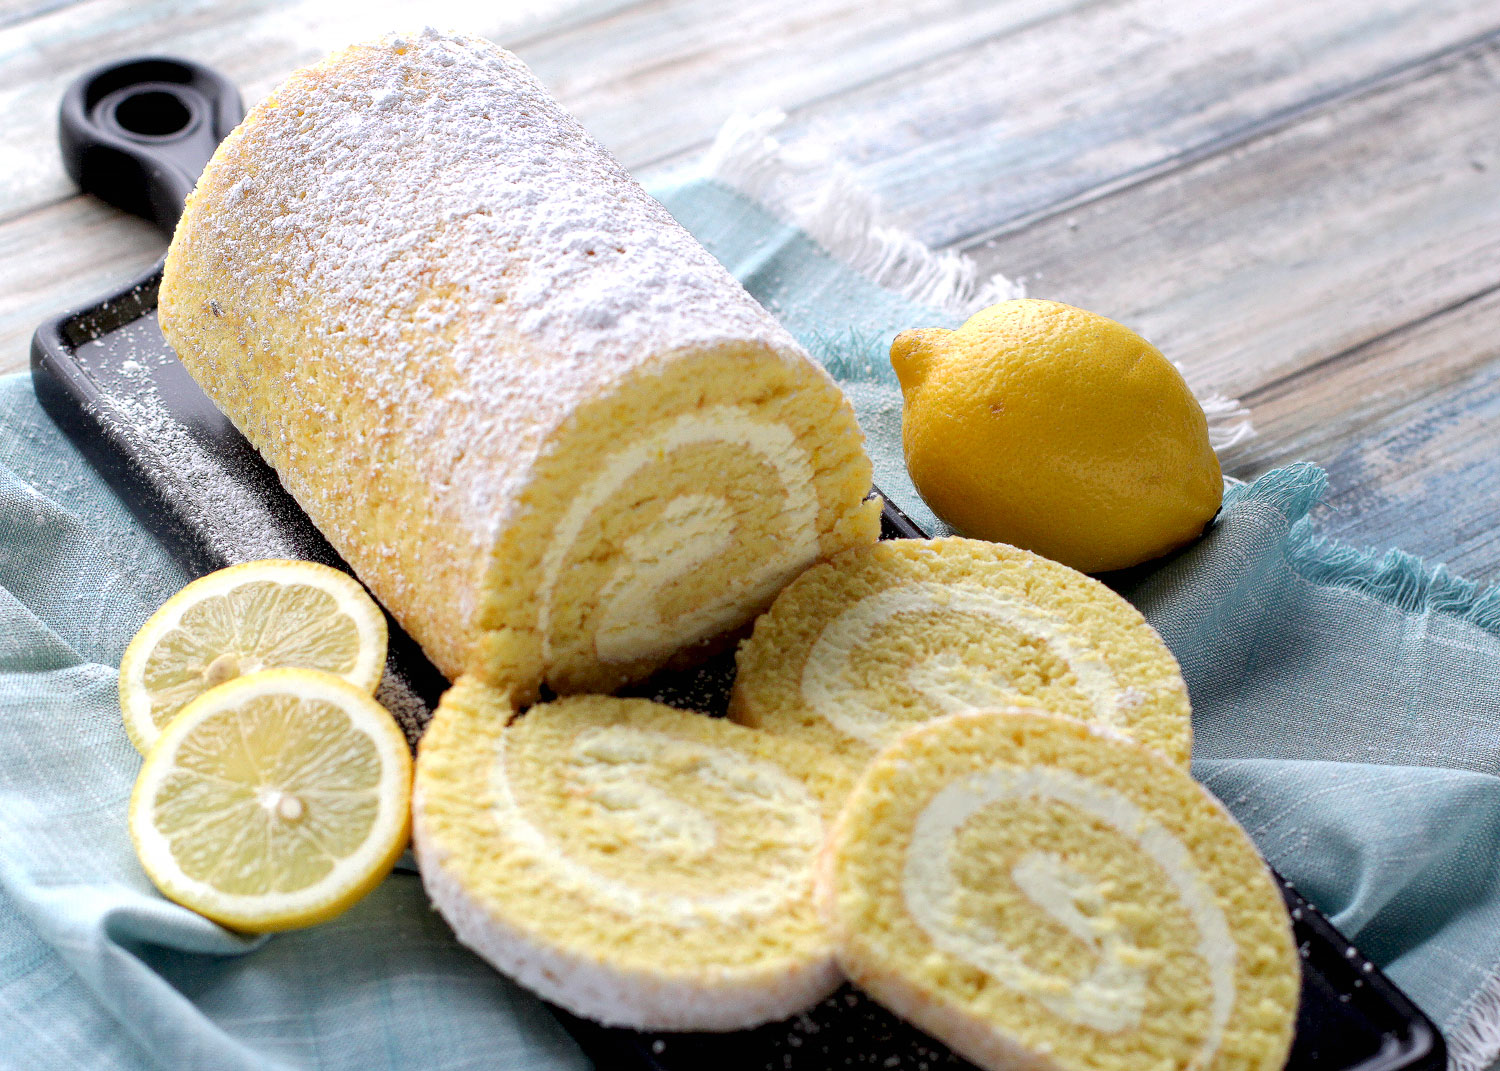 Lemon Crème cake roll and slices on cutting board next to a lemon and lemon slices